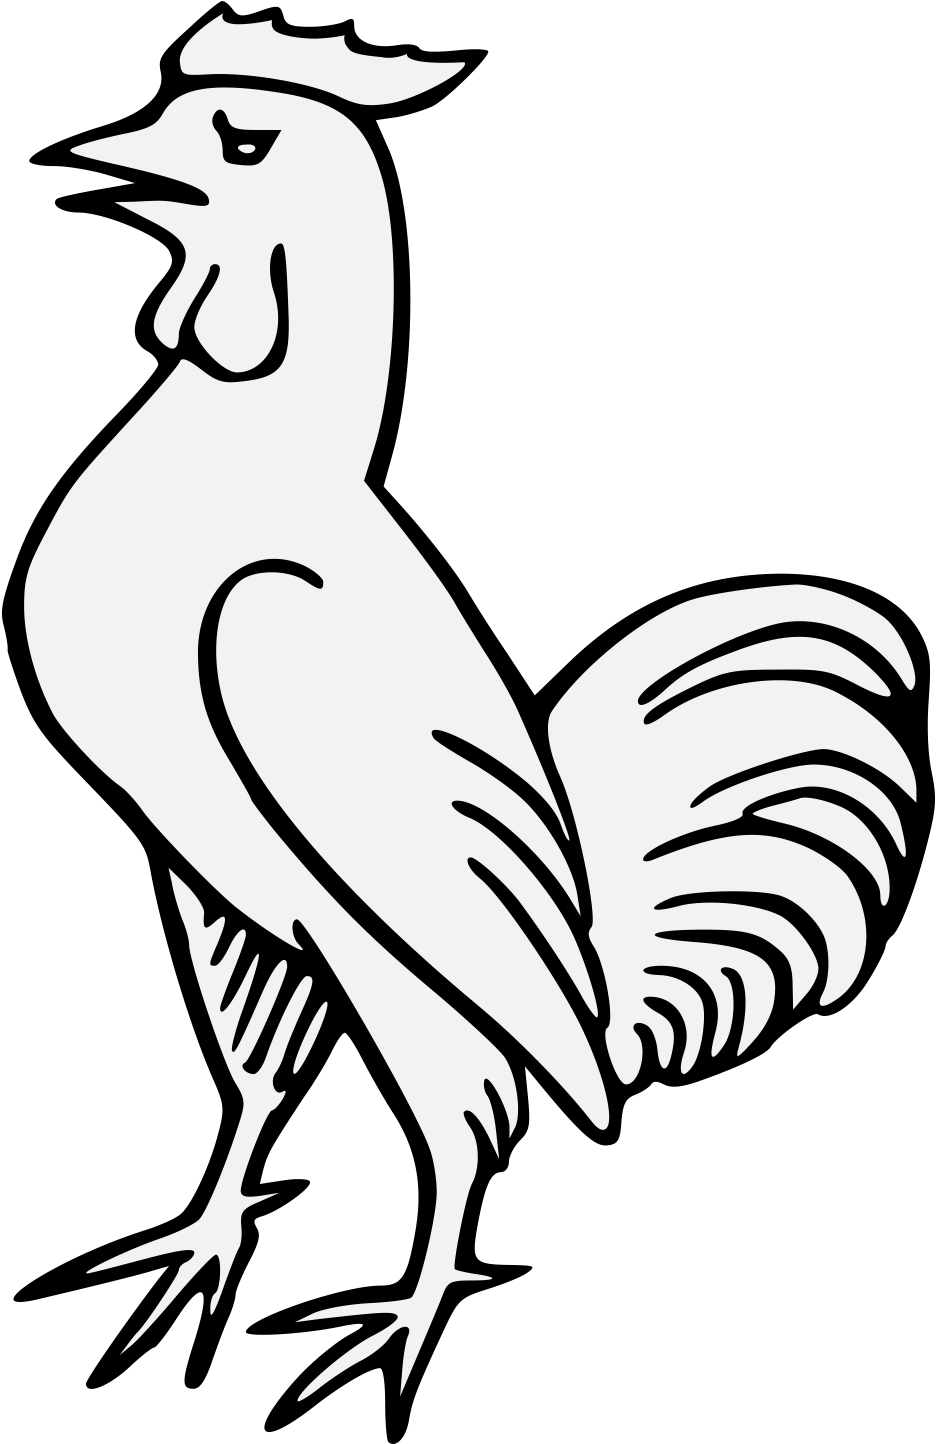 Cock - Rooster (993x1443)